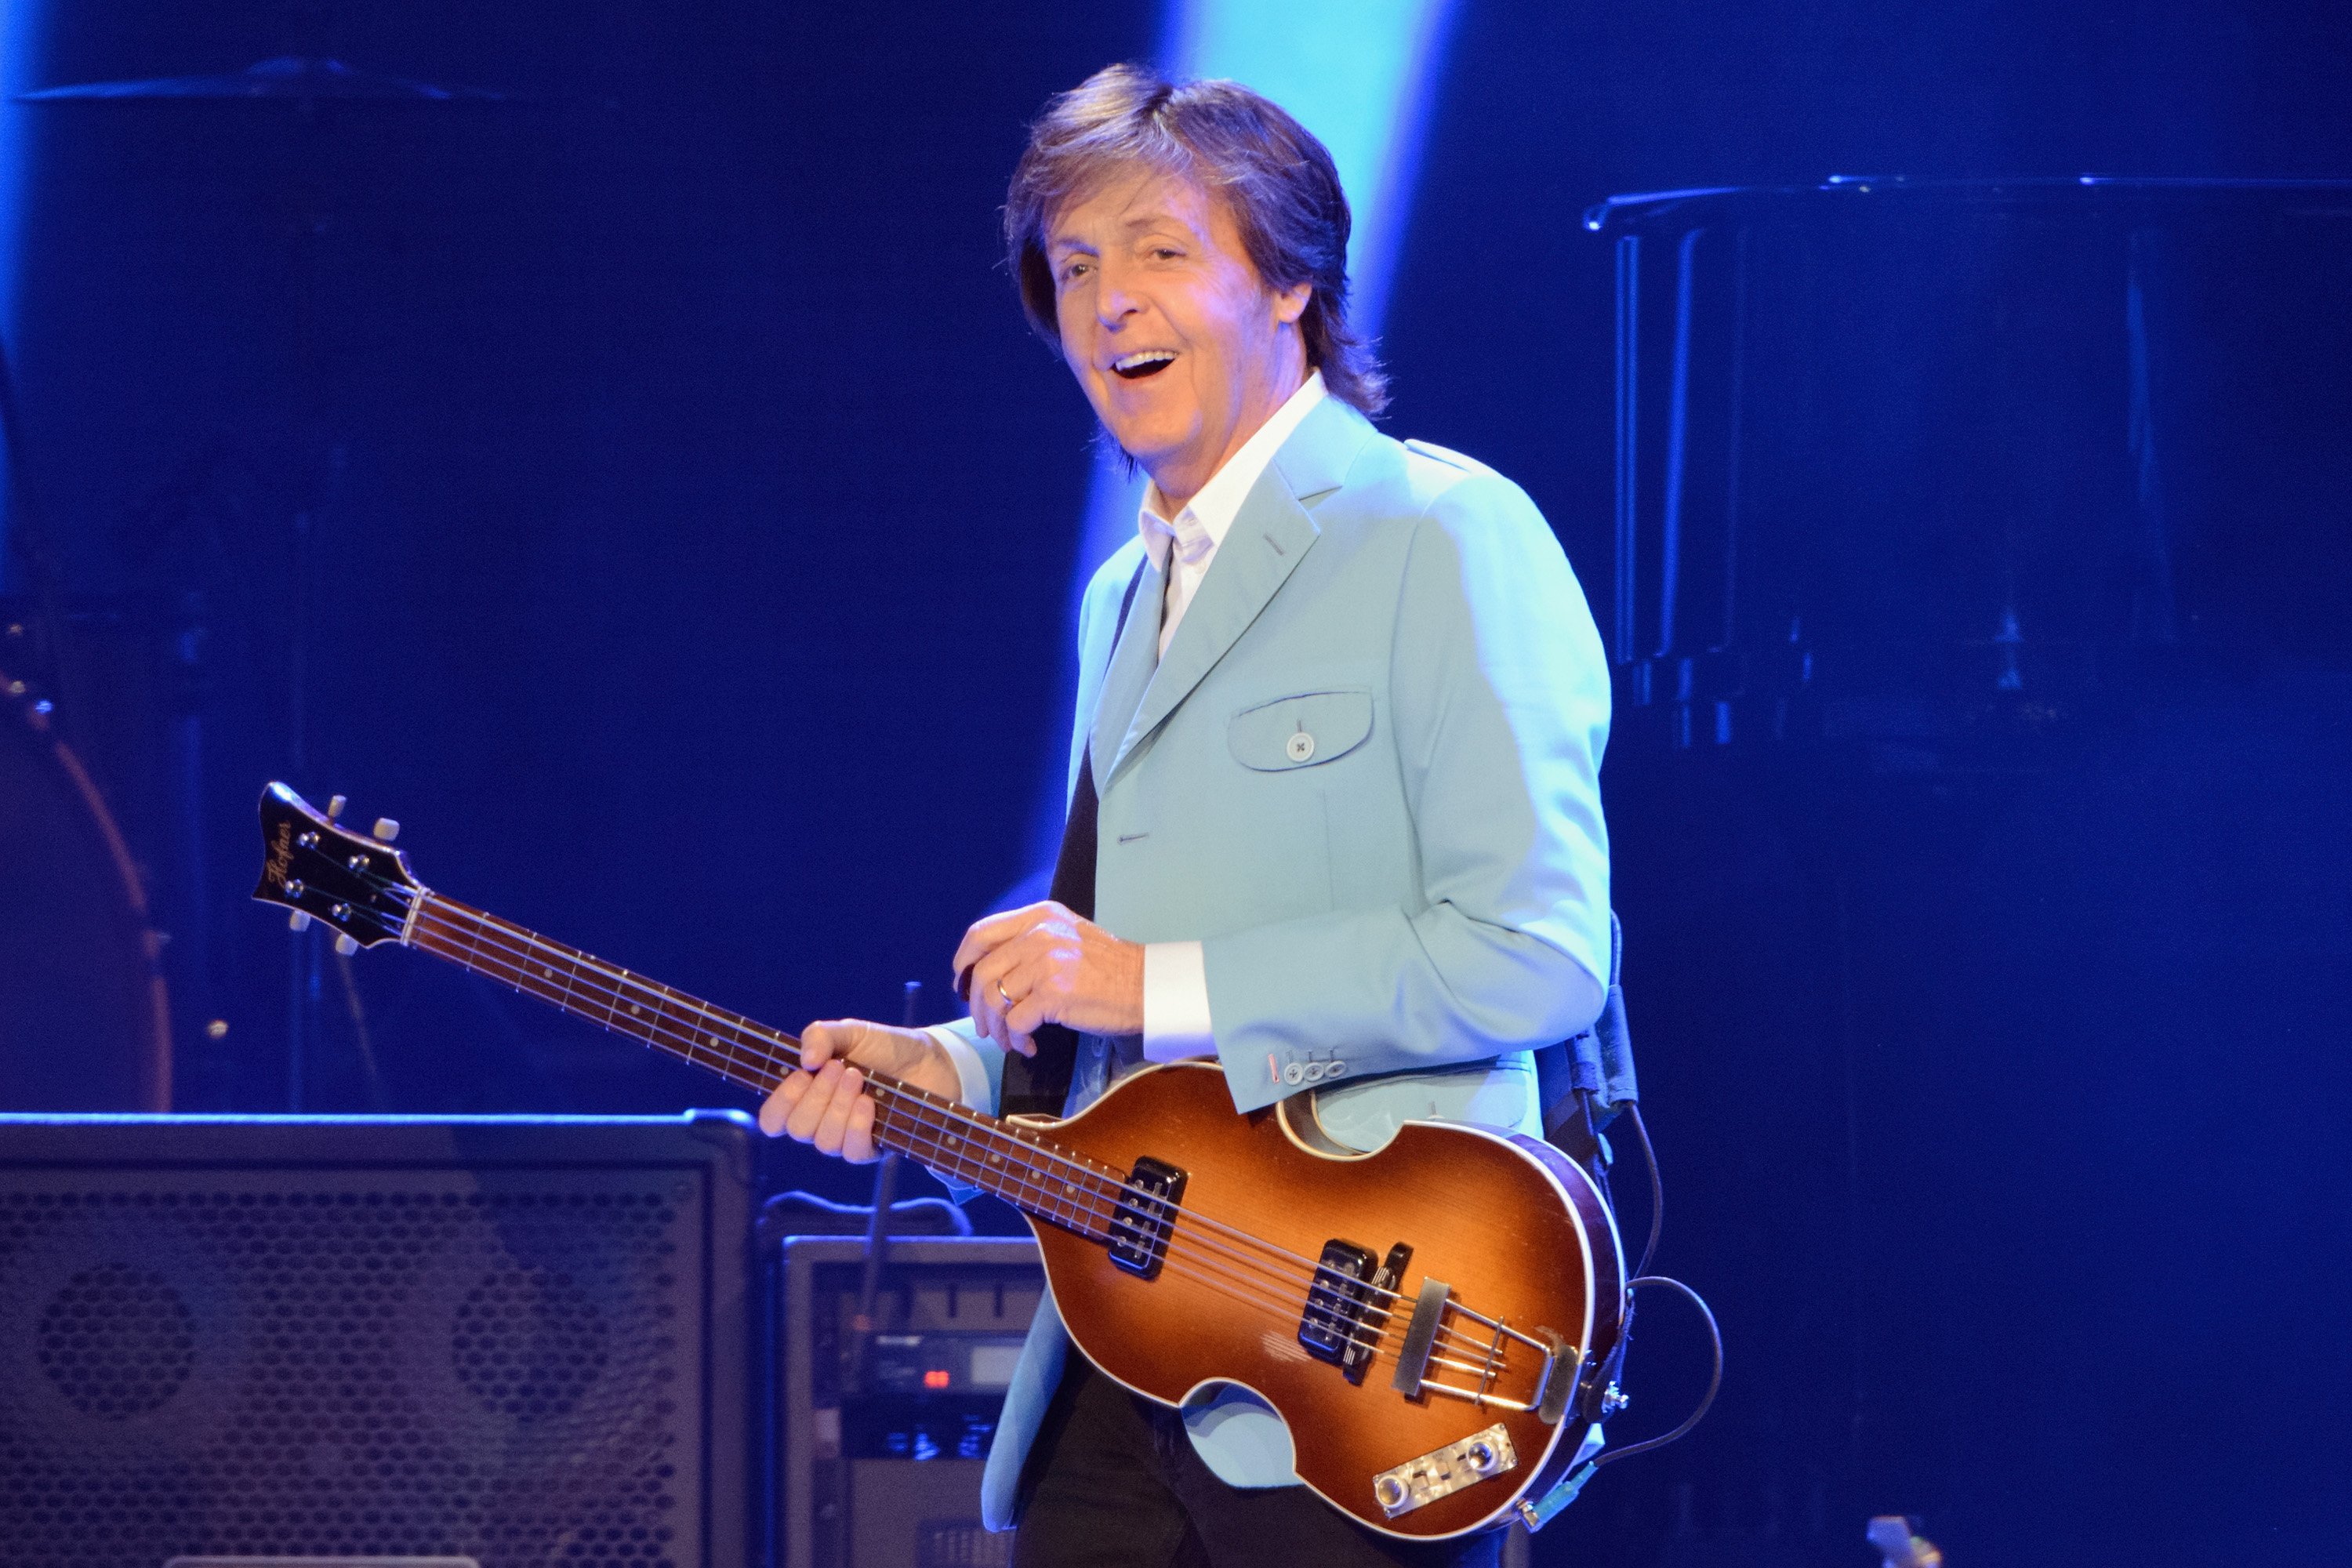 Paul McCartney performs at the United Center in Chicago, Illinois, in 2014